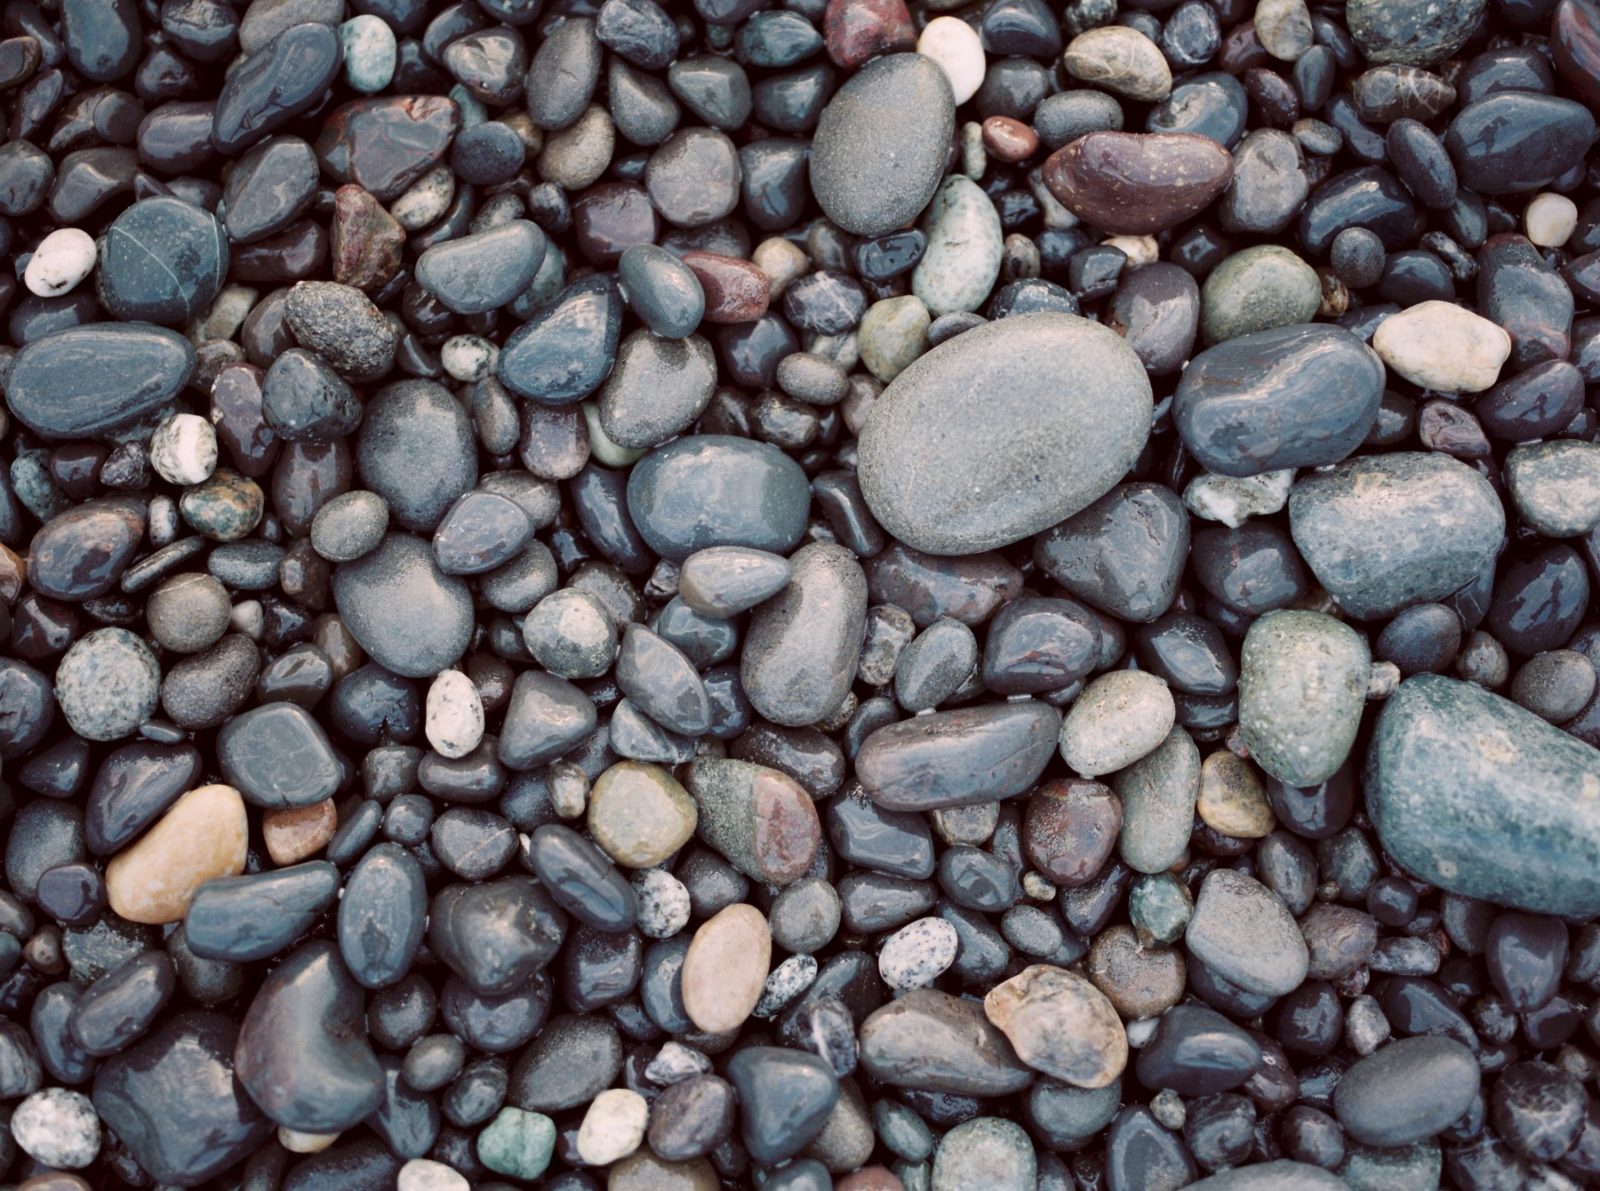 What Are The Benefits Of Having A Hot Stone Massage in Vermont?